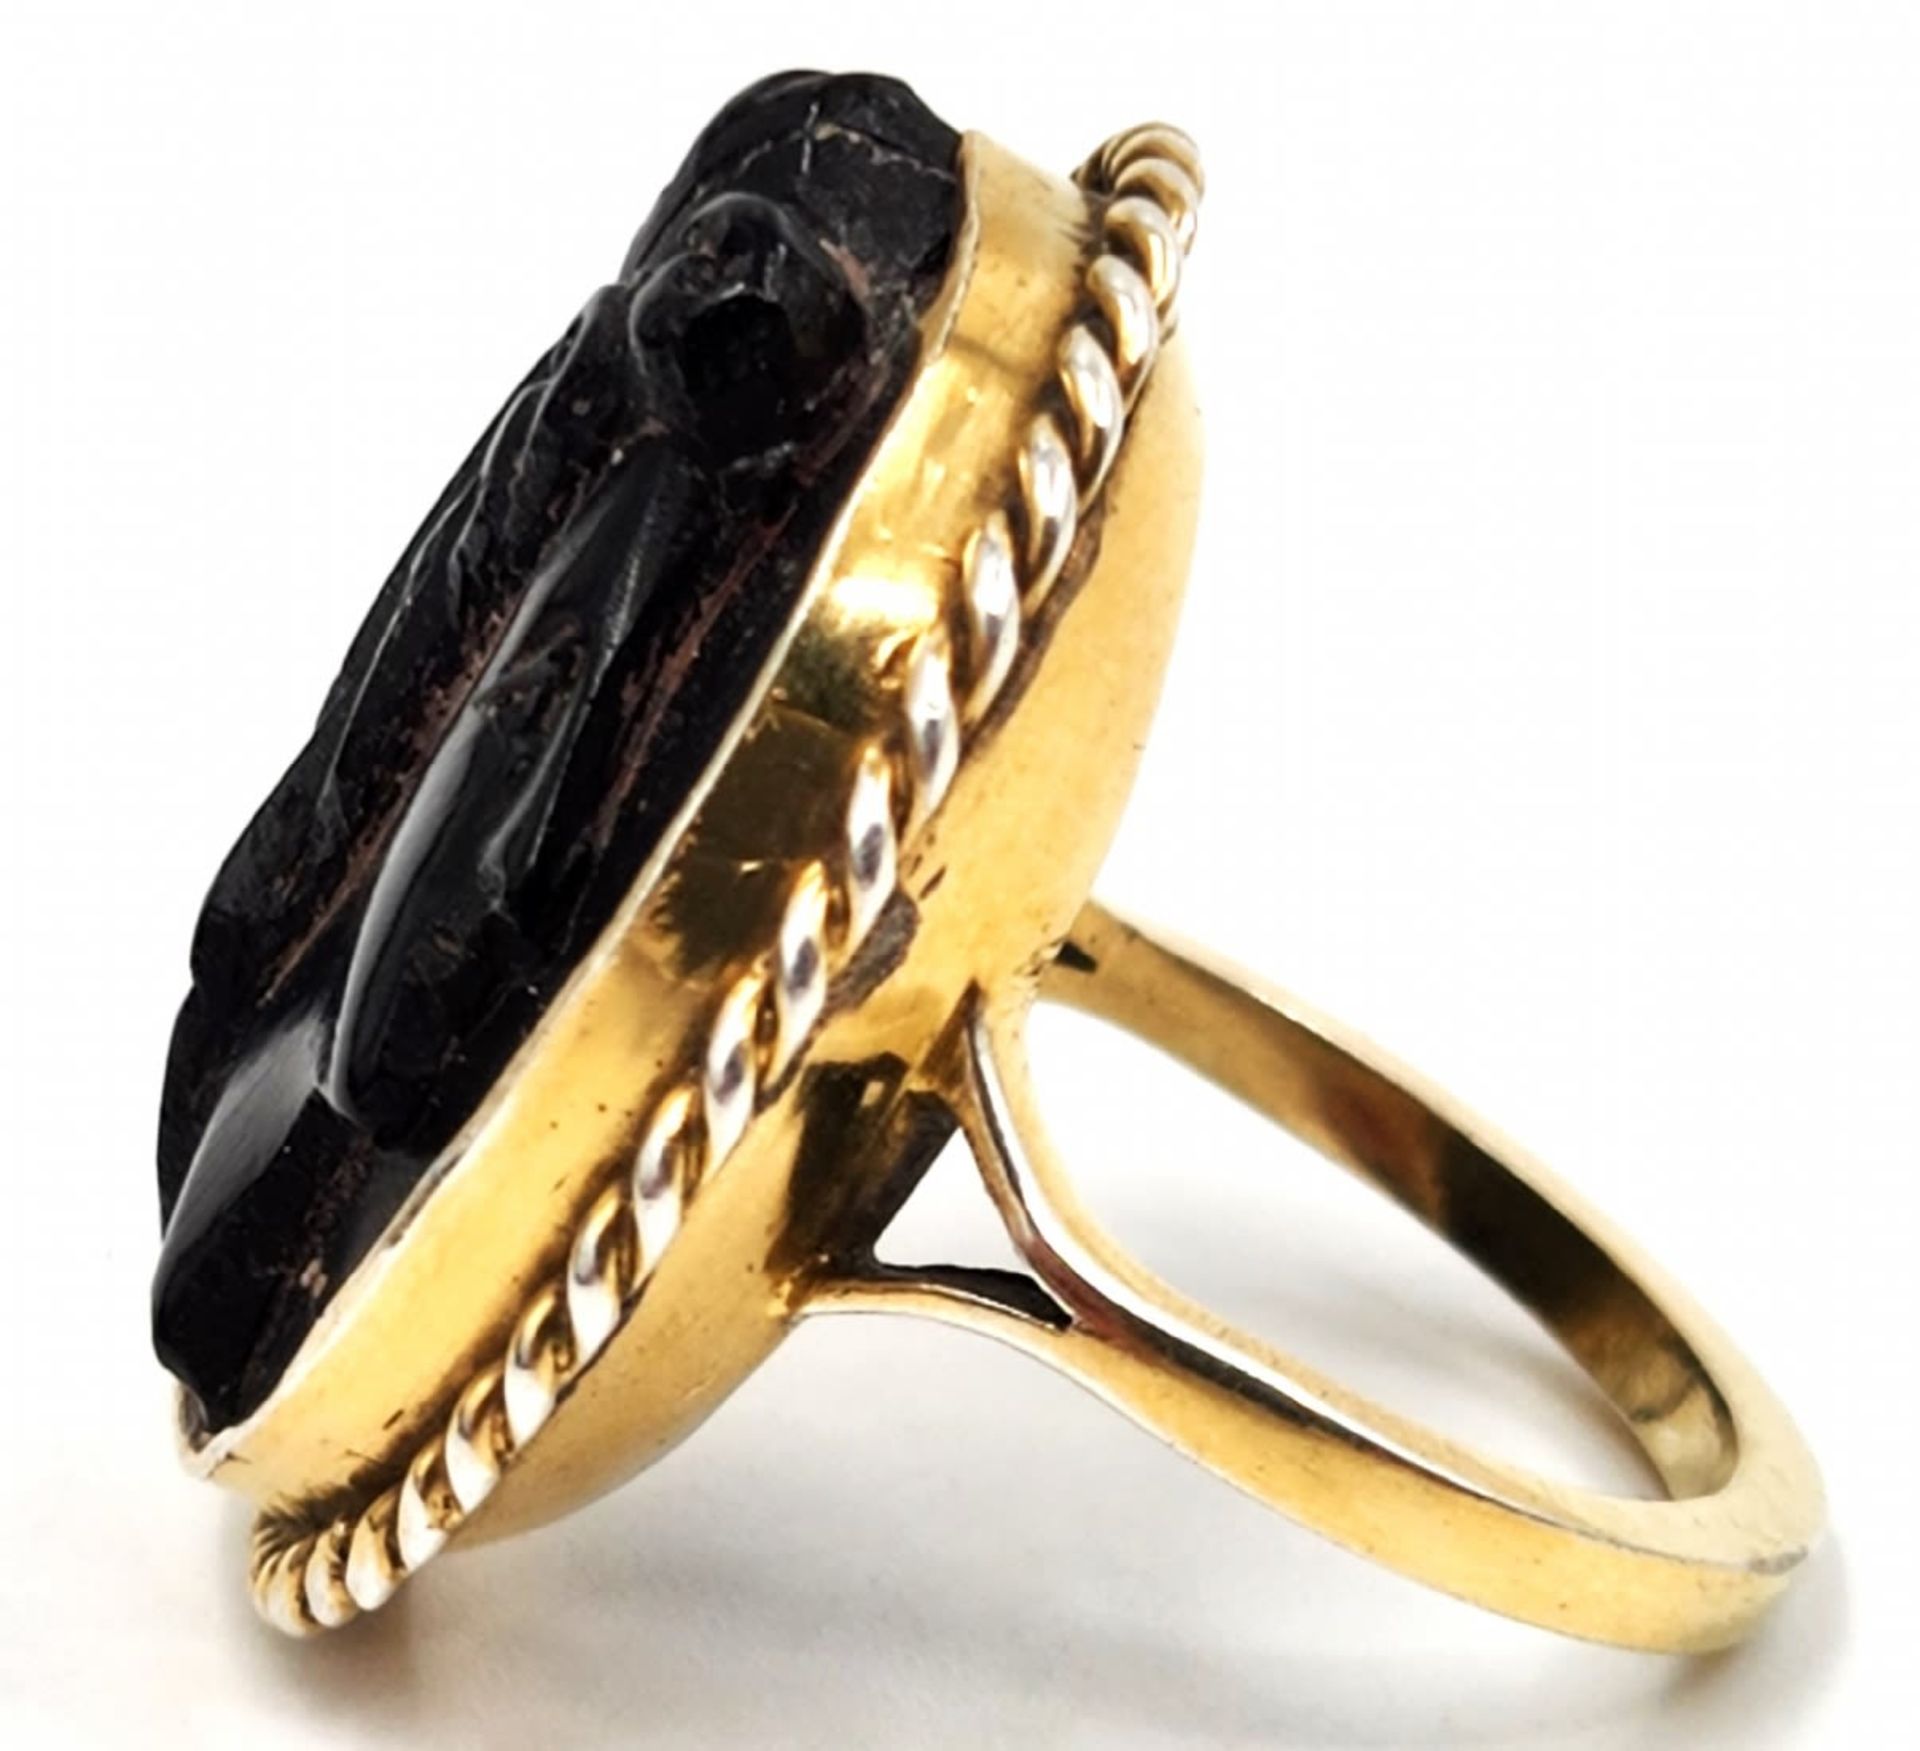 Antique 19th century English cameo 9K gold ring inlaid with a Whitby Jet plate, unsigned, the purity - Bild 2 aus 4